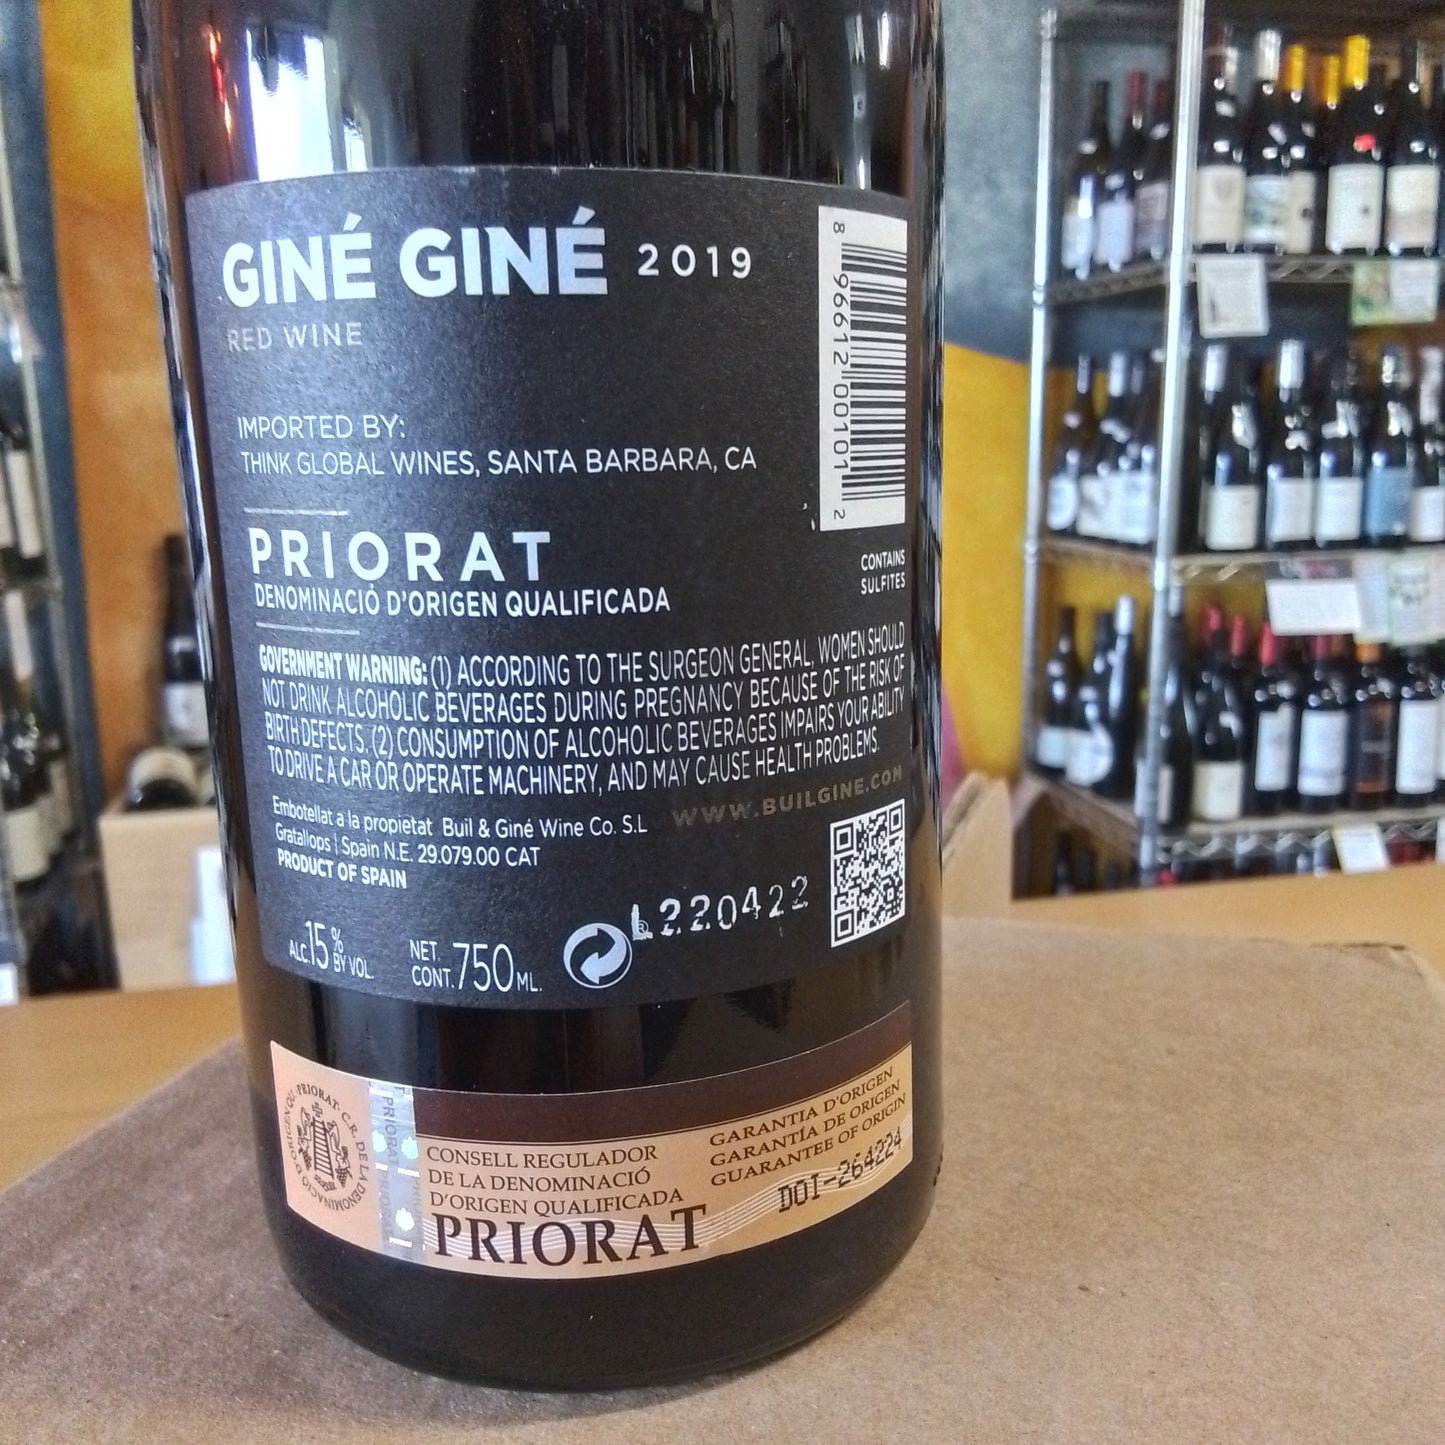 BUIL & GINE 2019 Red Blend 'Gine Gine' (Priorat, Spain)